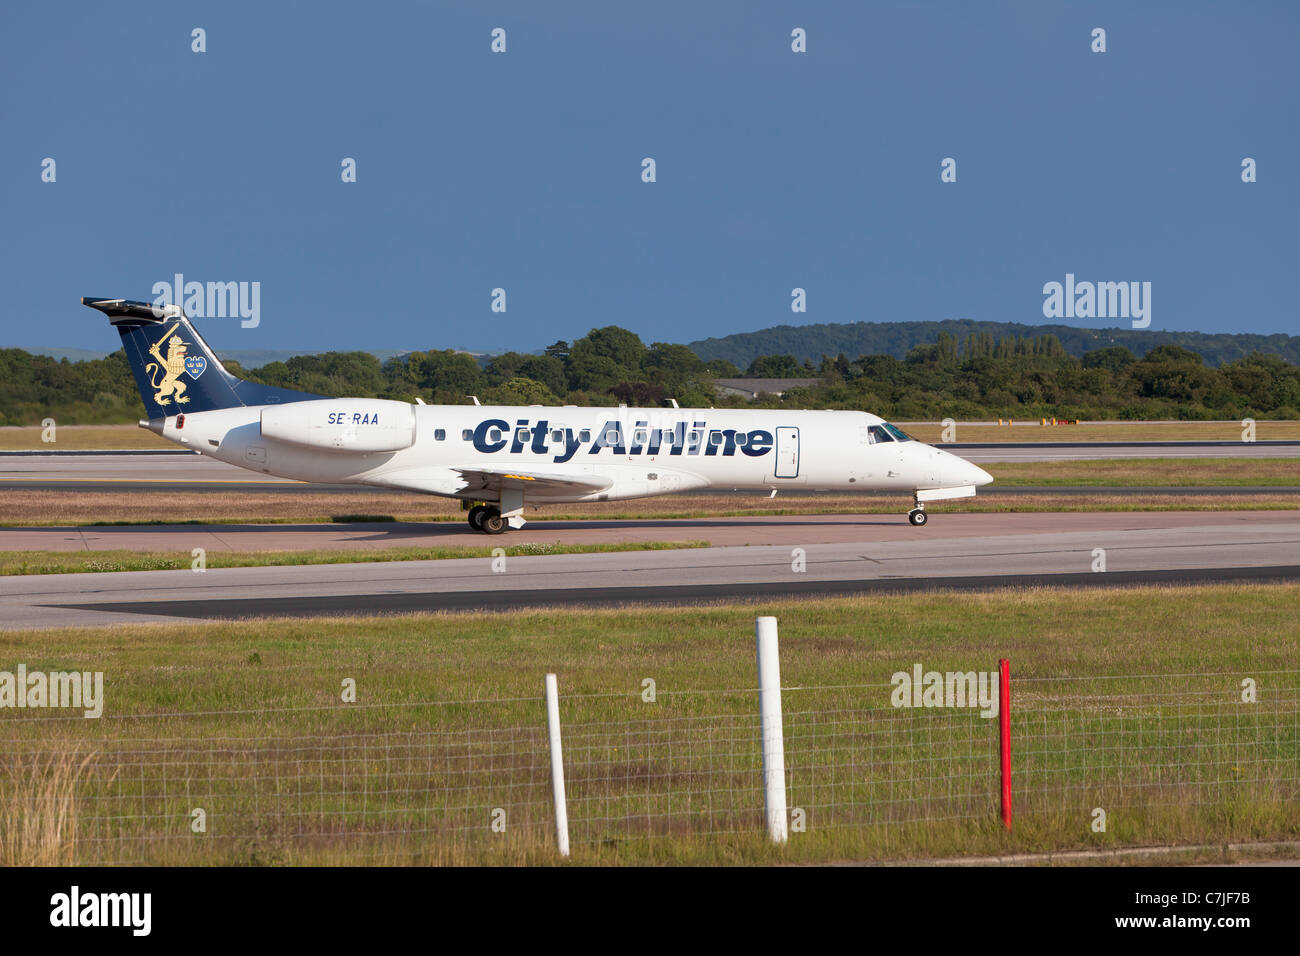 City Airline aircraft, England Stock Photo